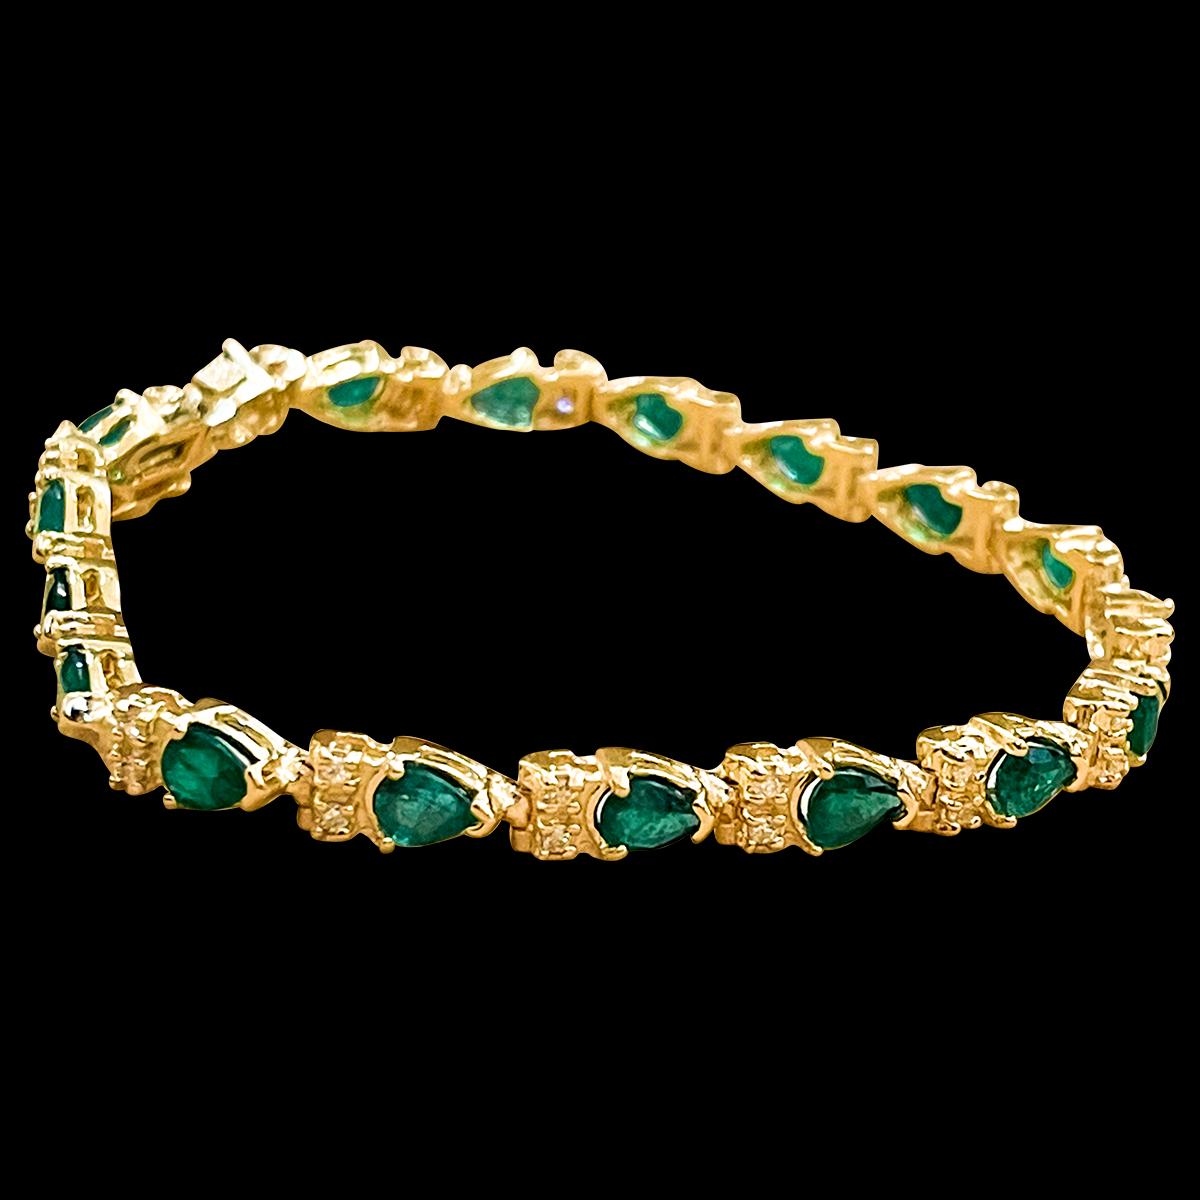 9 Ct Natural 18 Oval Stone Emerald & Diamond 14 Kt Yellow Gold Bracelet For Sale 7